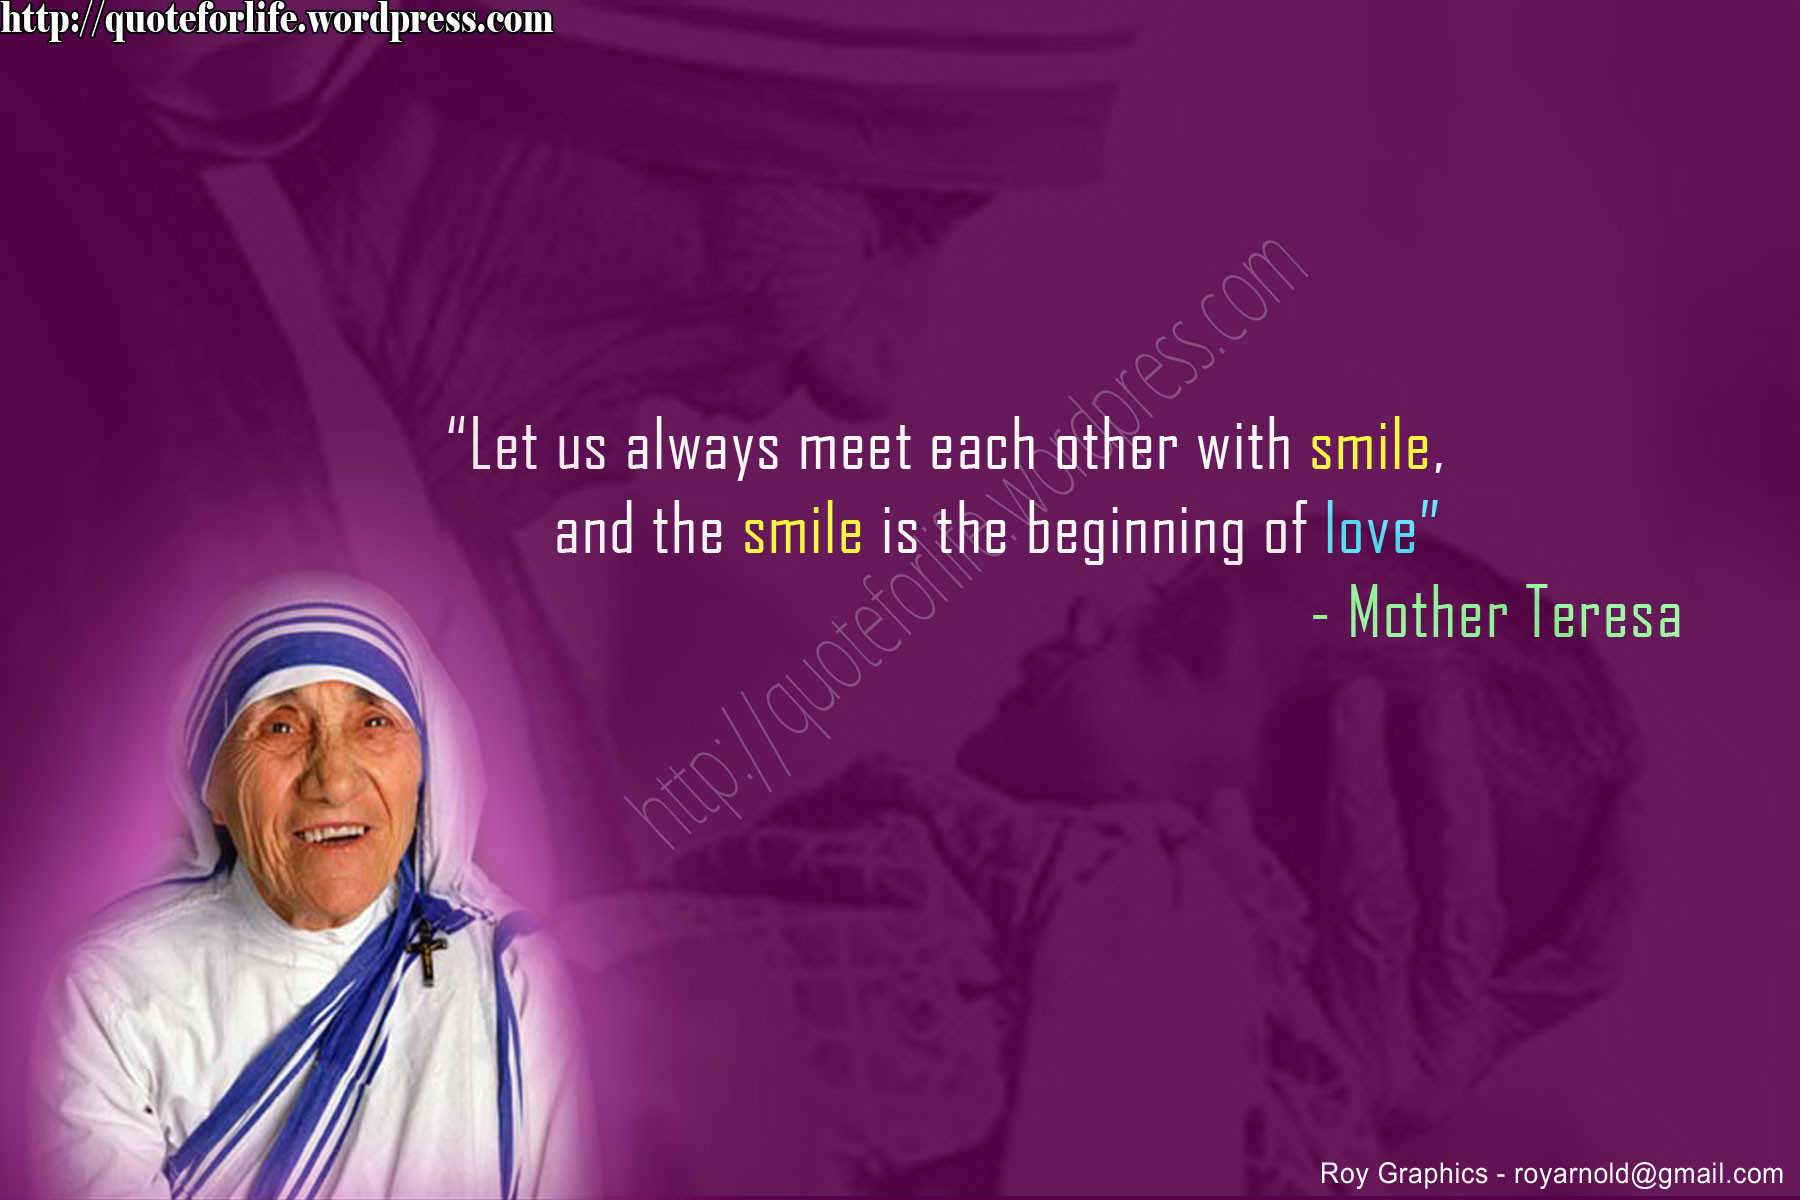 Mother Teresa Smile Quotes
 Love